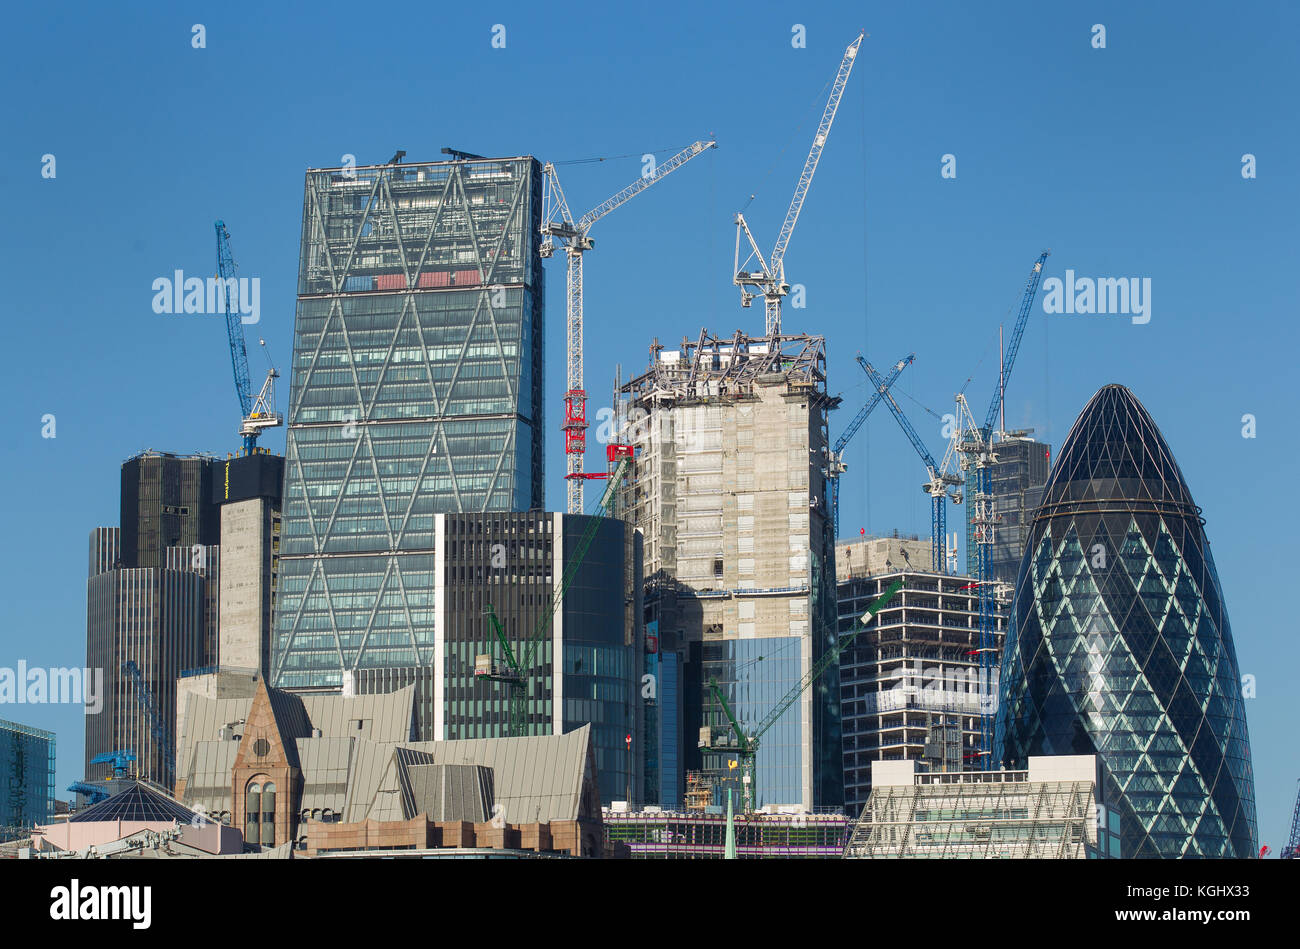 London city skyline seen from the river thames as cranes work on new buildings in the square mile Stock Photo